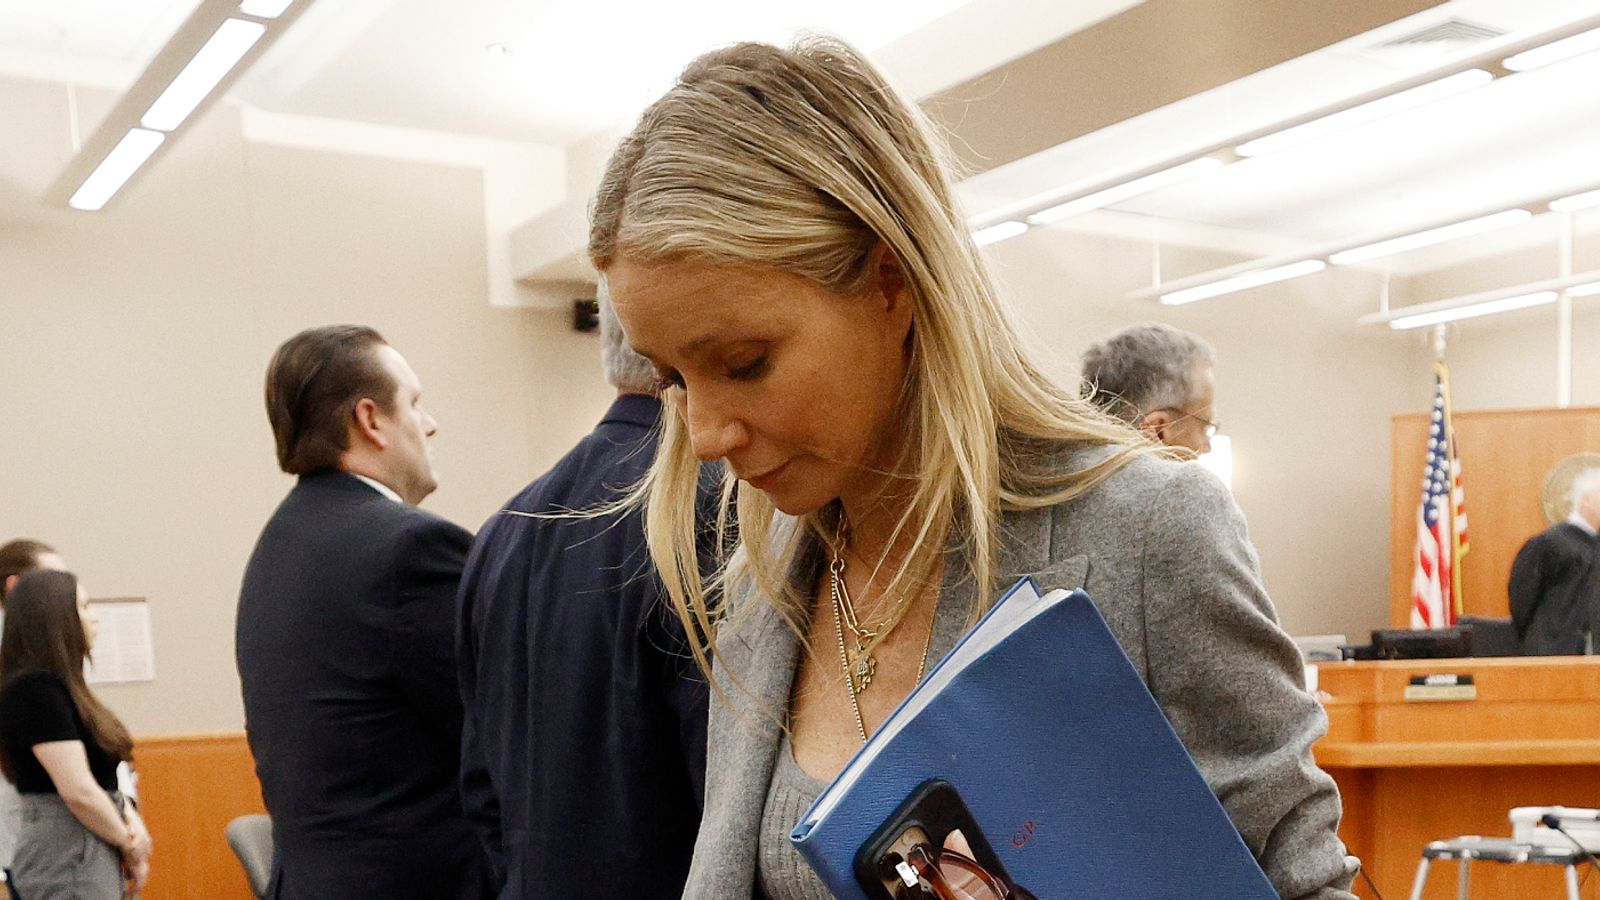 Gwyneth Paltrow's ski crash caused 'victim' to lose his love of life, court told